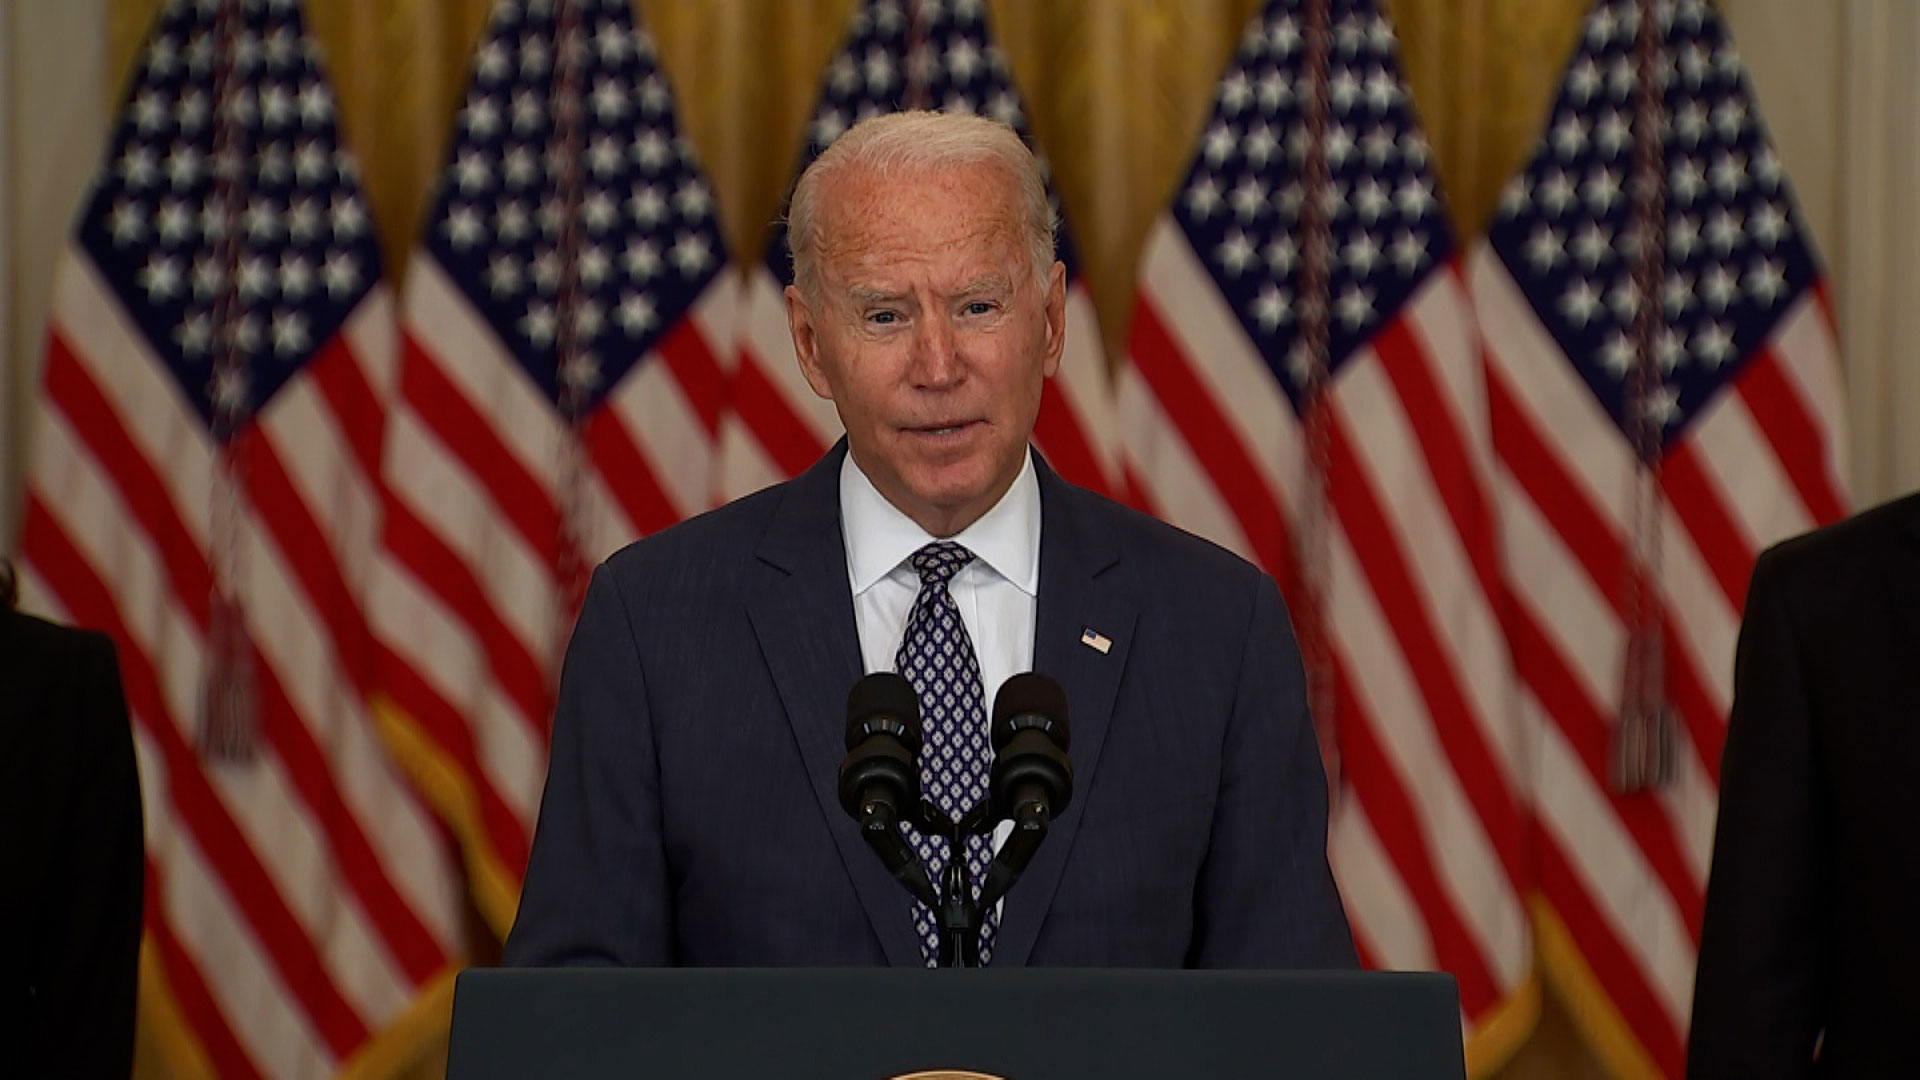 Biden speaks about Afghanistan evacuations as US scrambles to find more places to fly evacuees